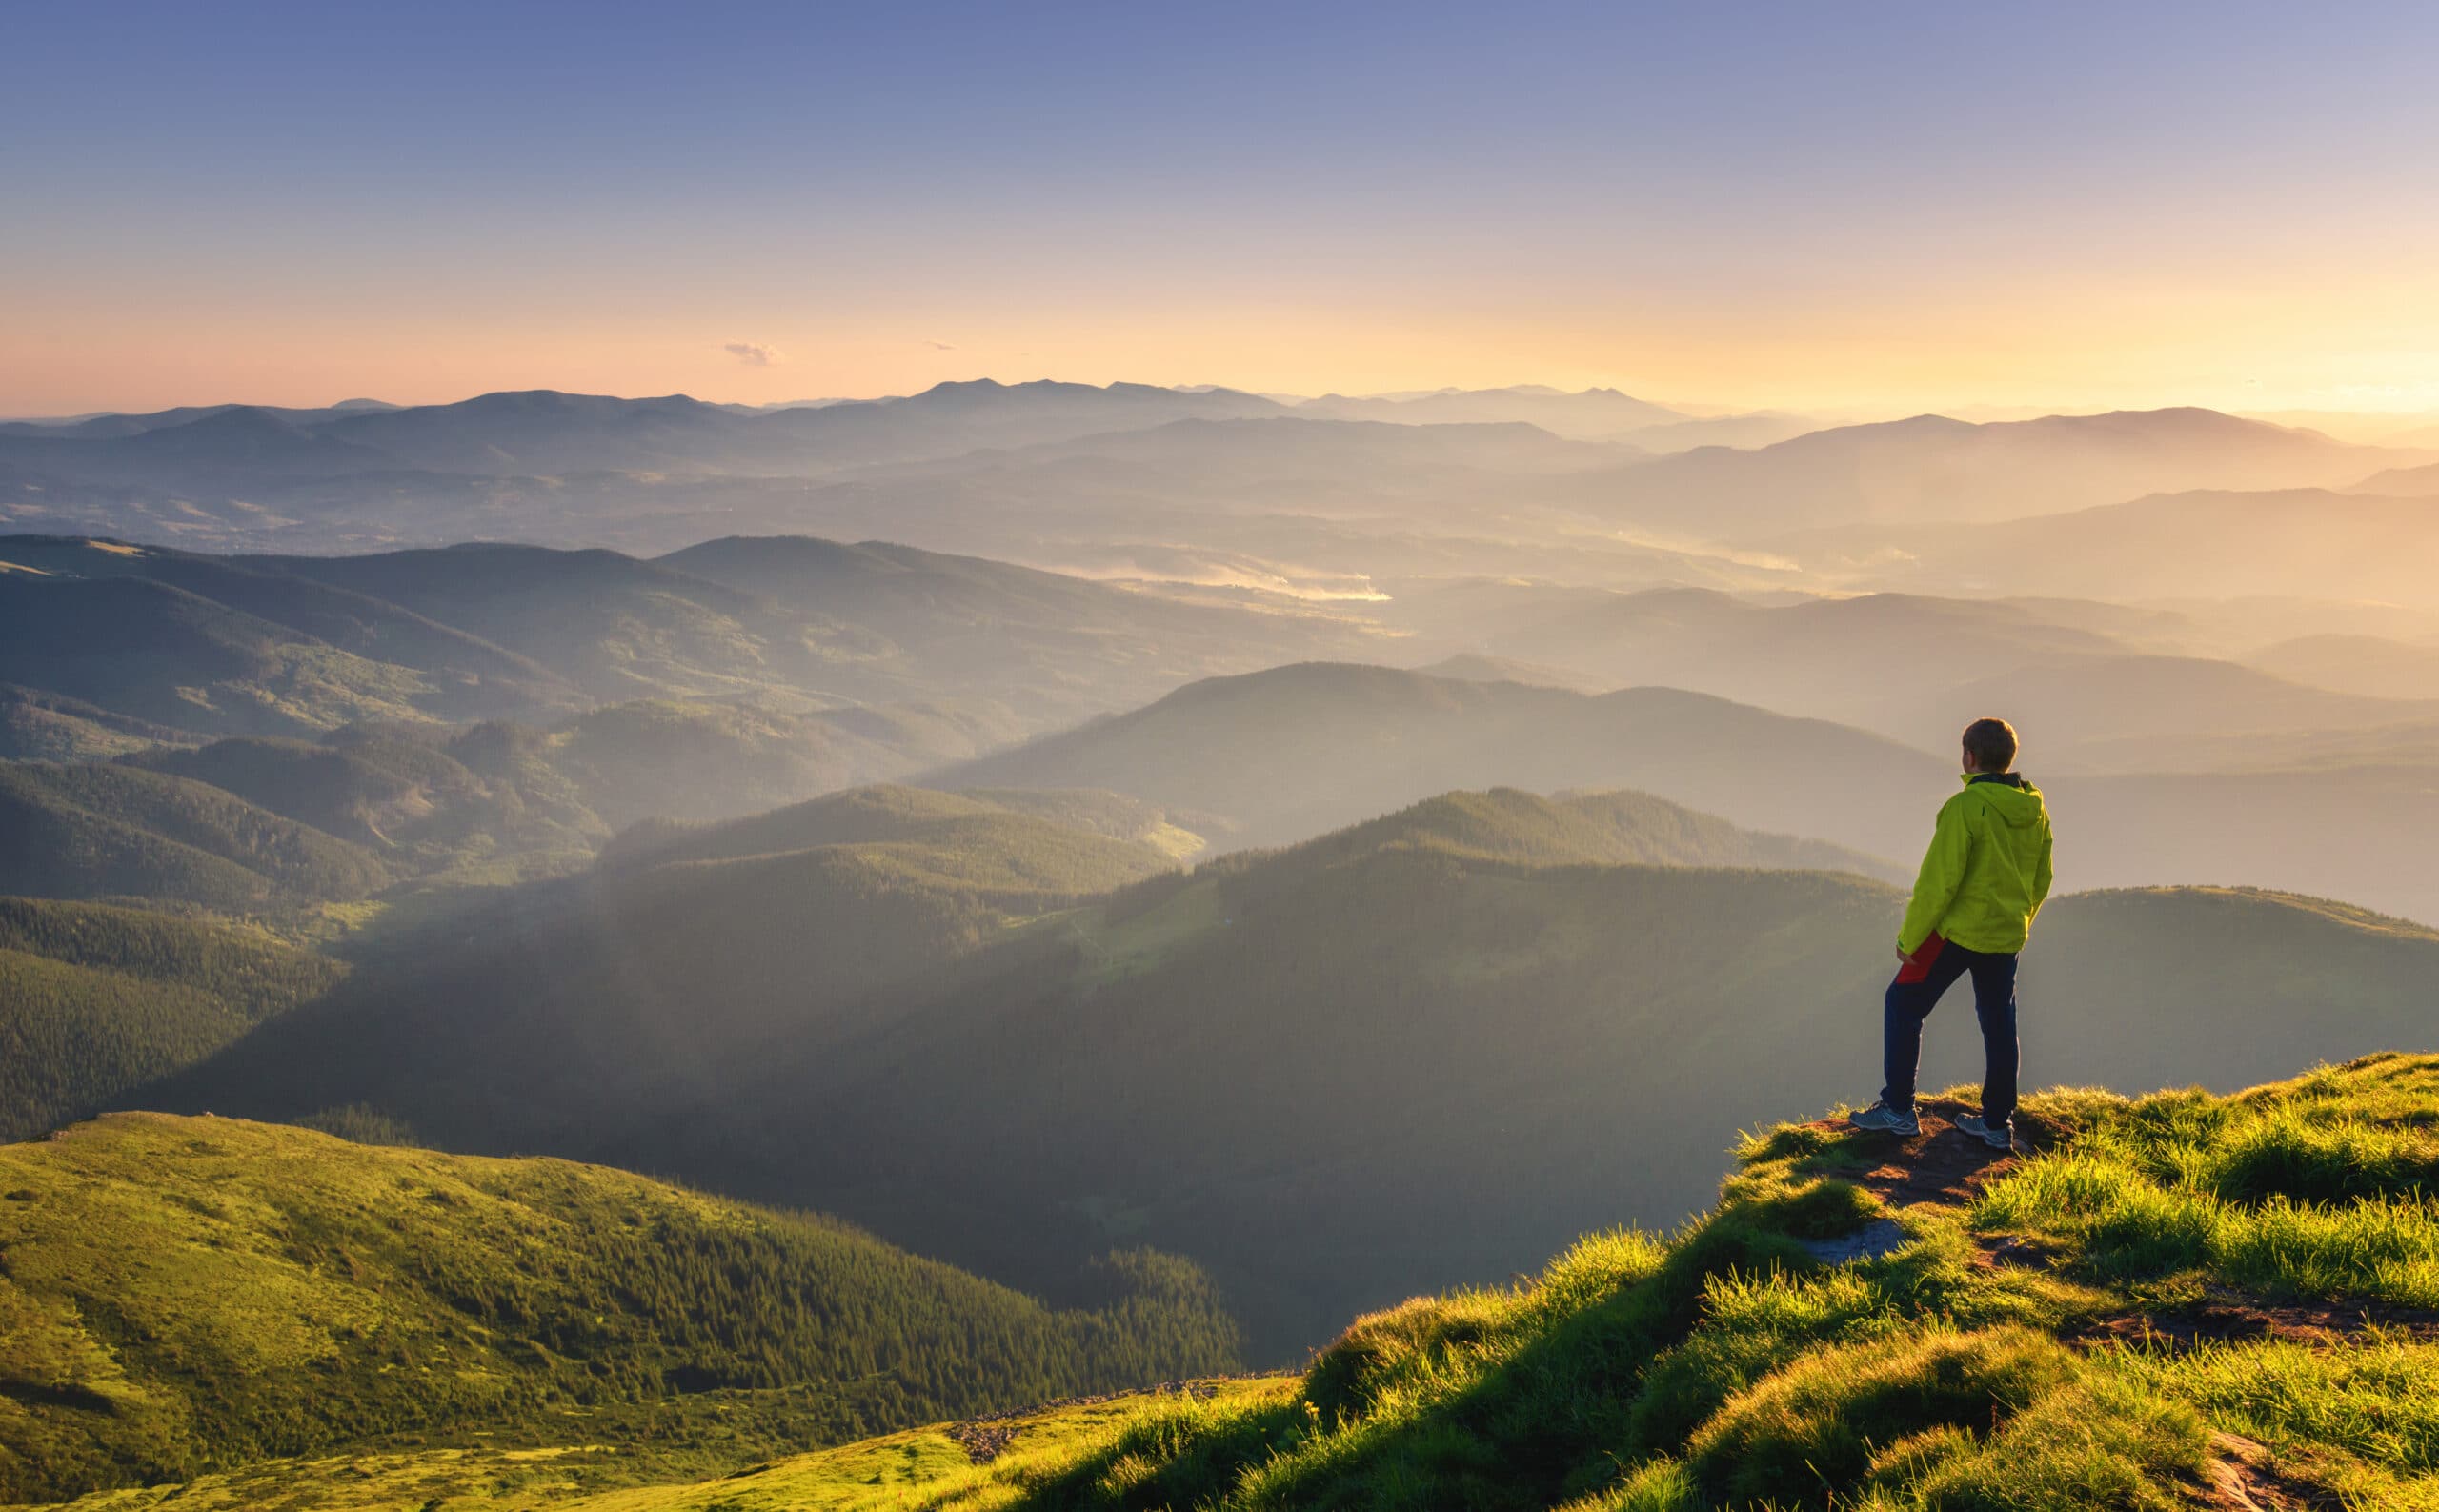 A male hiker stands at the top of a grassy ridge overlooking a mountain valley at sunset.